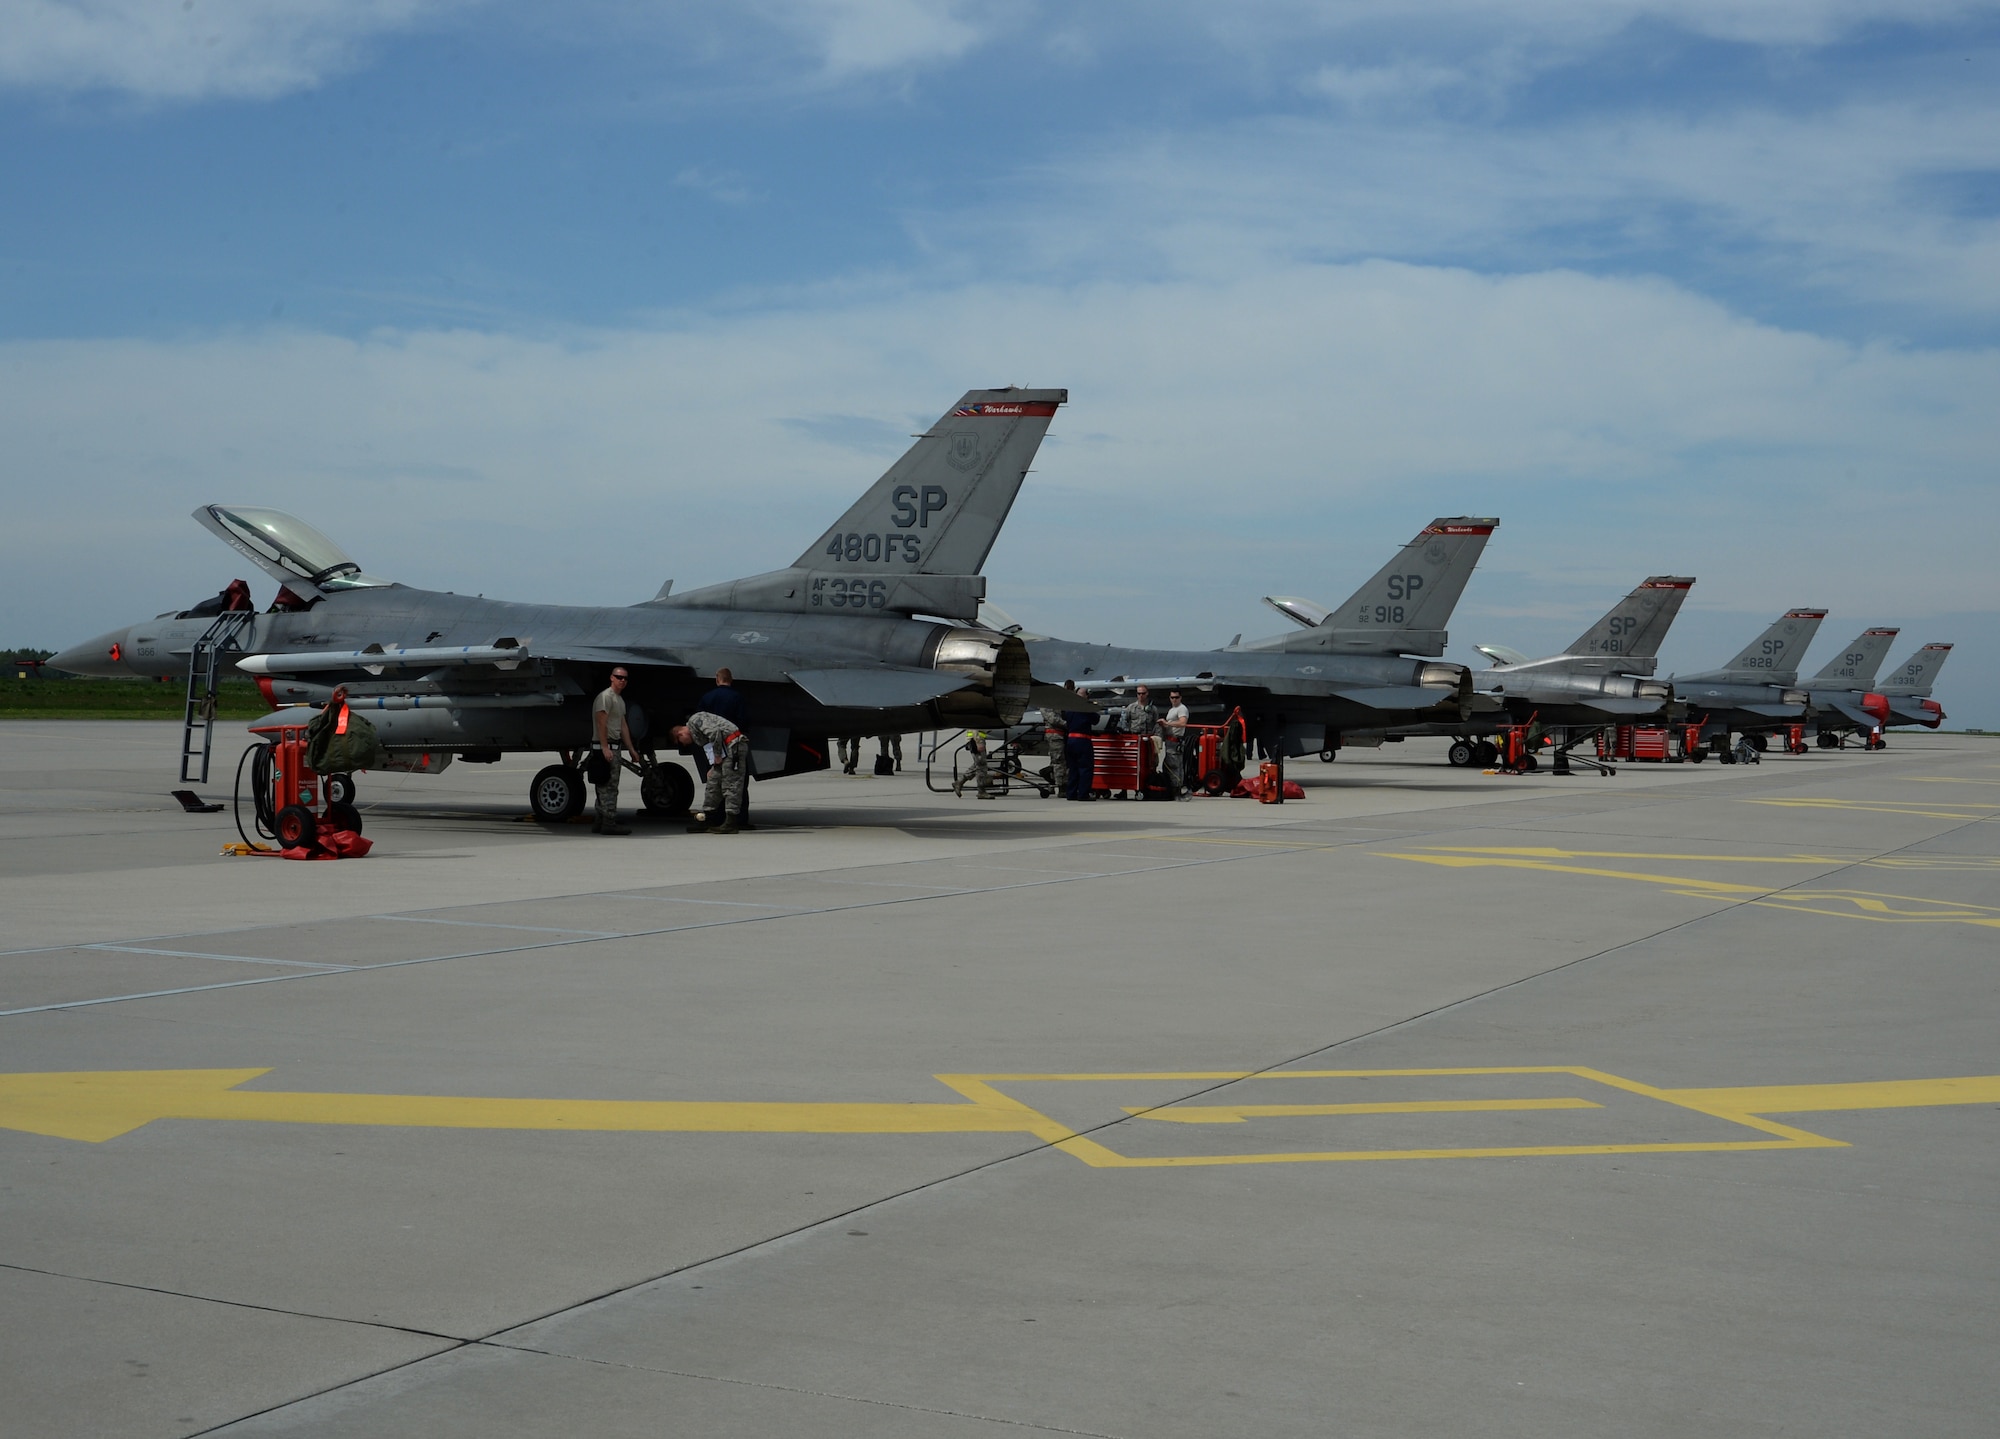 Six F-16 Fighting Falcon fighter aircraft assigned to the 480th Fighter Squadron receive maintenance while on the flightline at Łask Air Base, Poland, May 7, 2014. The 480th FS, known as the Warhawks, maintain a lineage of flying service going back more than 50 years. (U.S. Air Force photo illustration by Staff Sgt. Joe W. McFadden/Released)